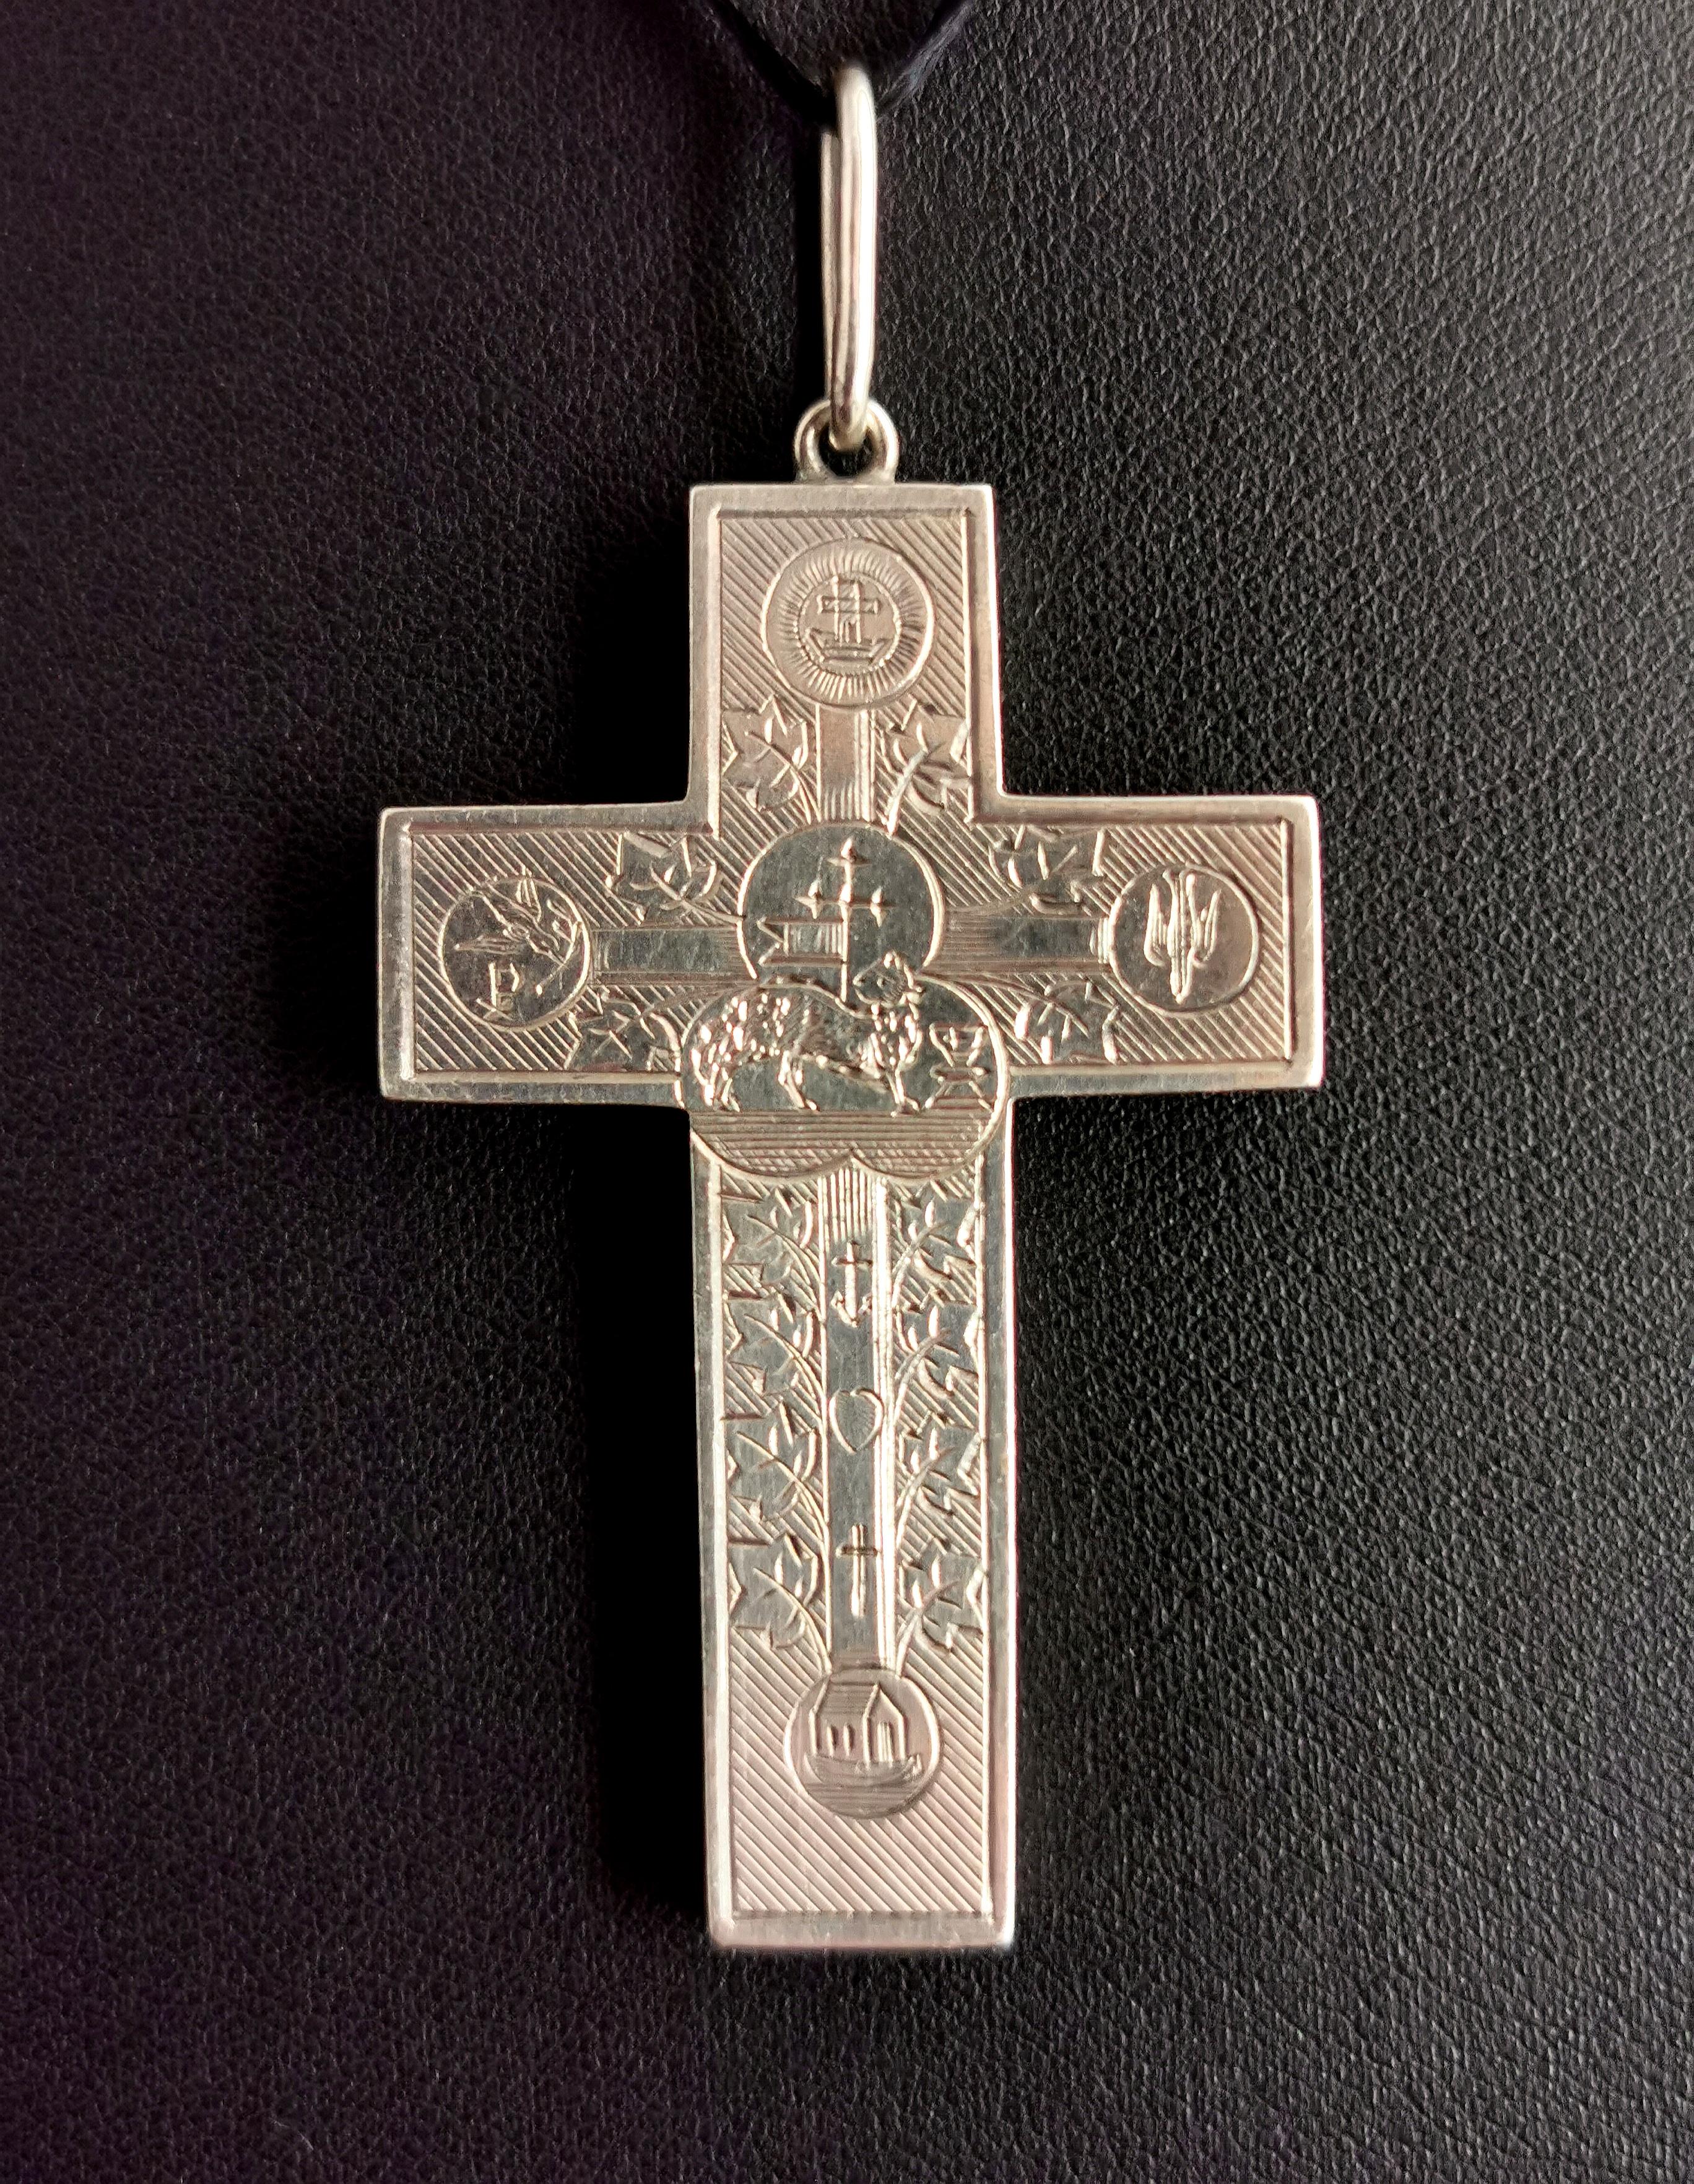 A beautiful and rare antique Victorian silver cross pendant.

This special piece is heavily engraved with various religious symbols to the front.

Amongst others there is Noahs Ark, The dove of peace carrying an olive branch, Saint Esprit and the